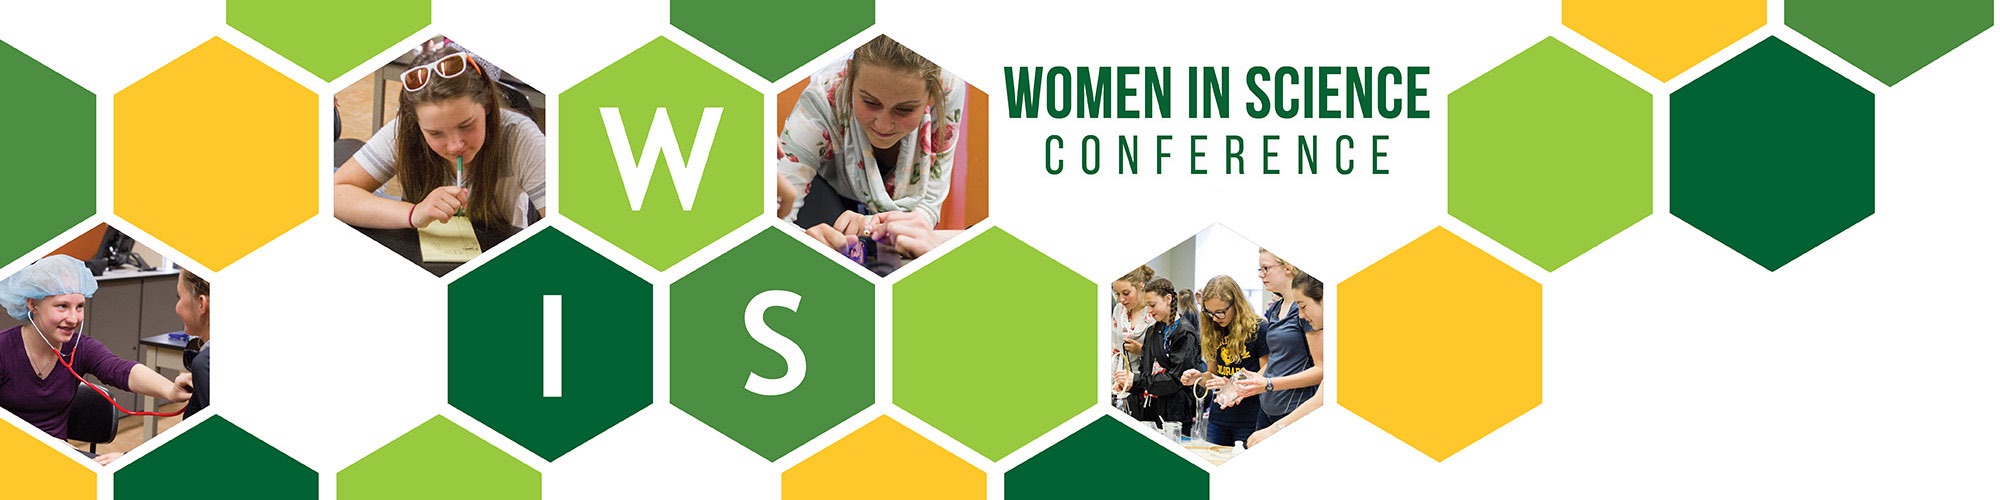 Women in Science Conference Banner